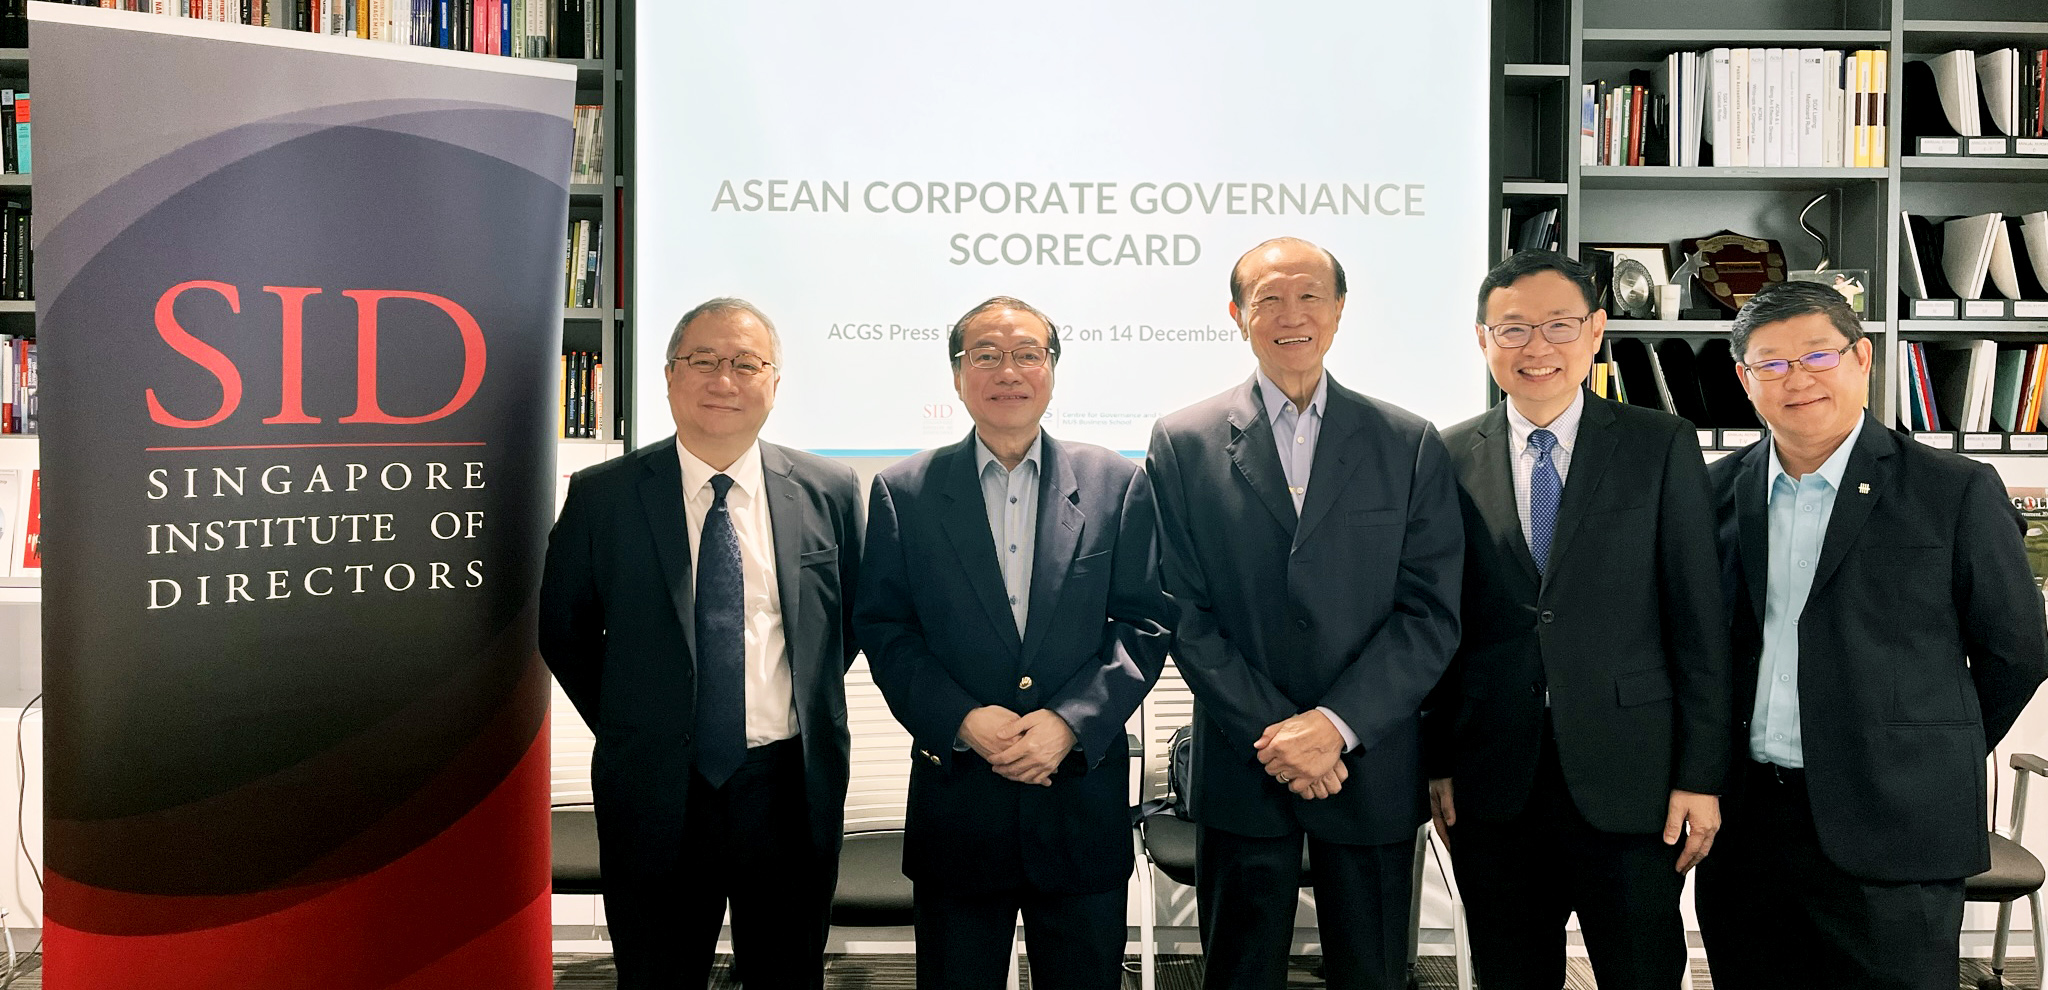 Singapore publicly-listed business entities have performed significantly better in the Asean Corporate Governance Scorecard 2021. From left: Mr Derek Koh, Chief Financial Officer, ComfortDelGro Group; Professor Lawrence Loh, Director of the Centre for Governance and Sustainability at NUS Business School; Mr John Lim, lead member in the domestic ranking body for Singapore and Past Chair of the Singapore Institute of Directors; Mr Tong Yew Heng, CEO, Netlink NBN Trust; Mr Chan Kok Seong, Chief Risk Officer, United Overseas Bank. Netlink NBN Trust, United Overseas Bank and ComfortDelGro lead the race among Singapore’s assessed listed entities. 